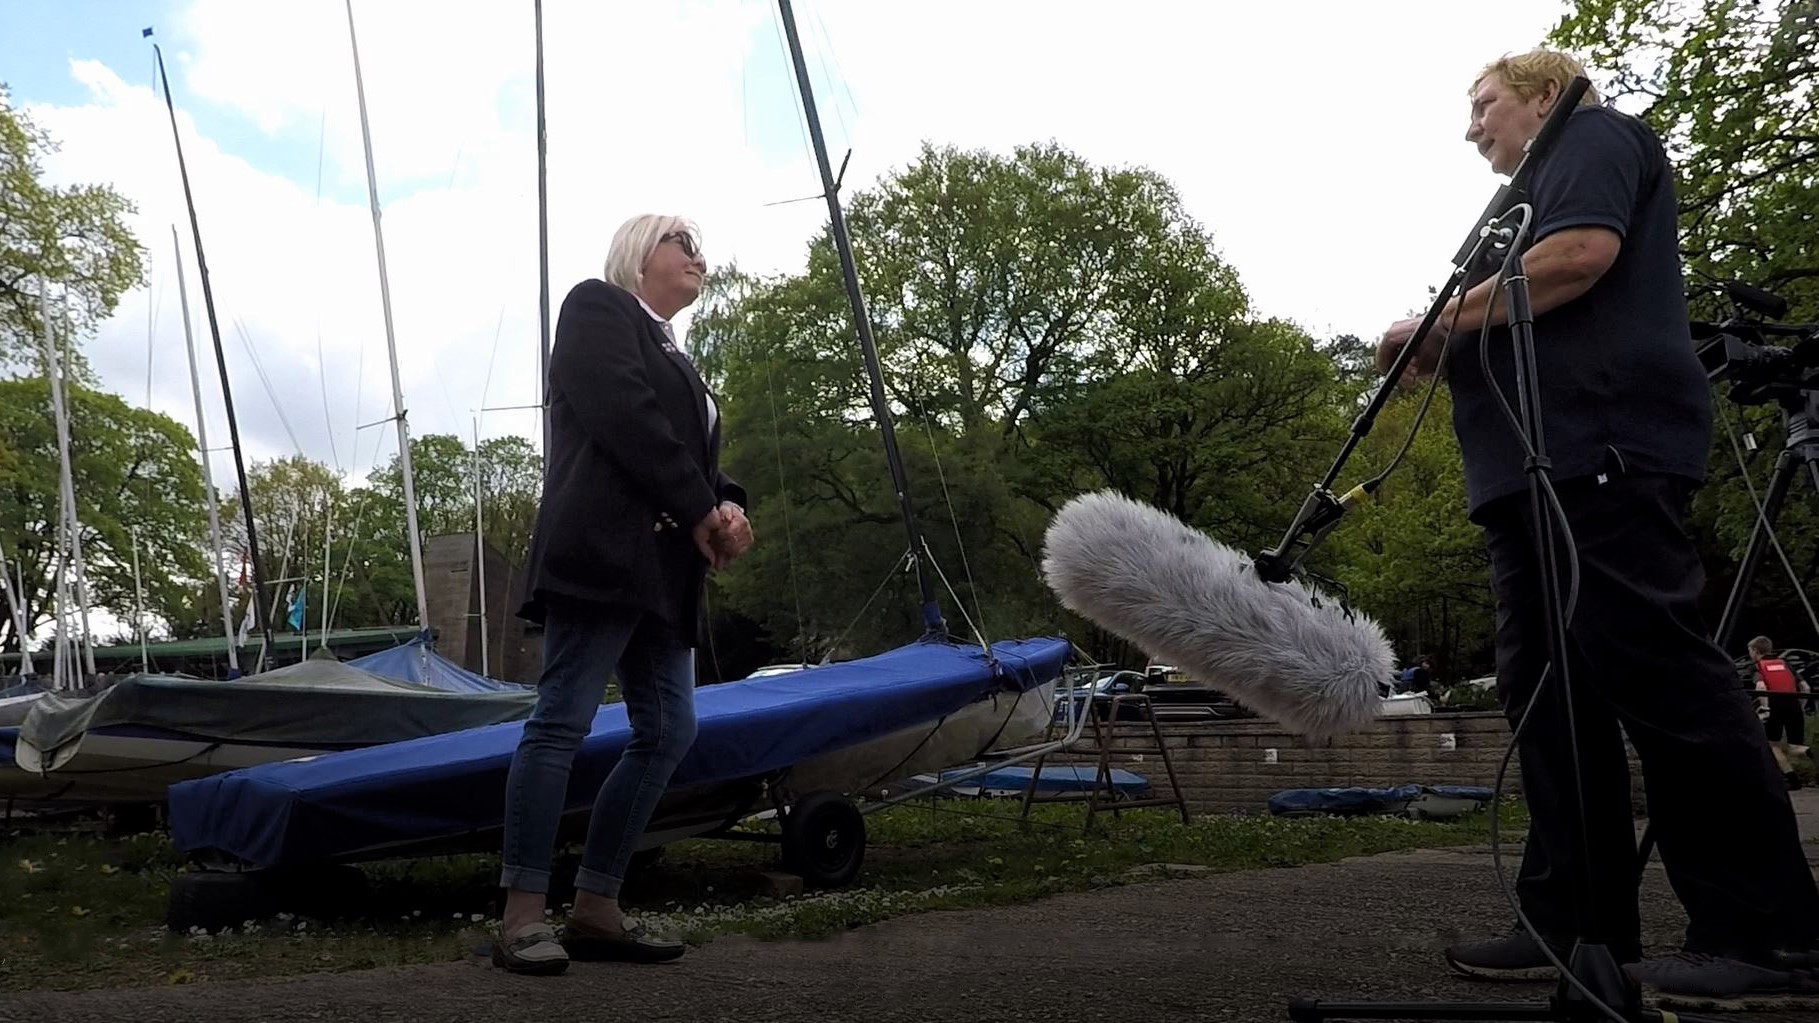 Rudyard Lake SC Commodore Jane Hill is interviewed about the roles of women on the club's management committee by Sailing Development Officer Patricia Ordsmith for Steering the Course 2022.